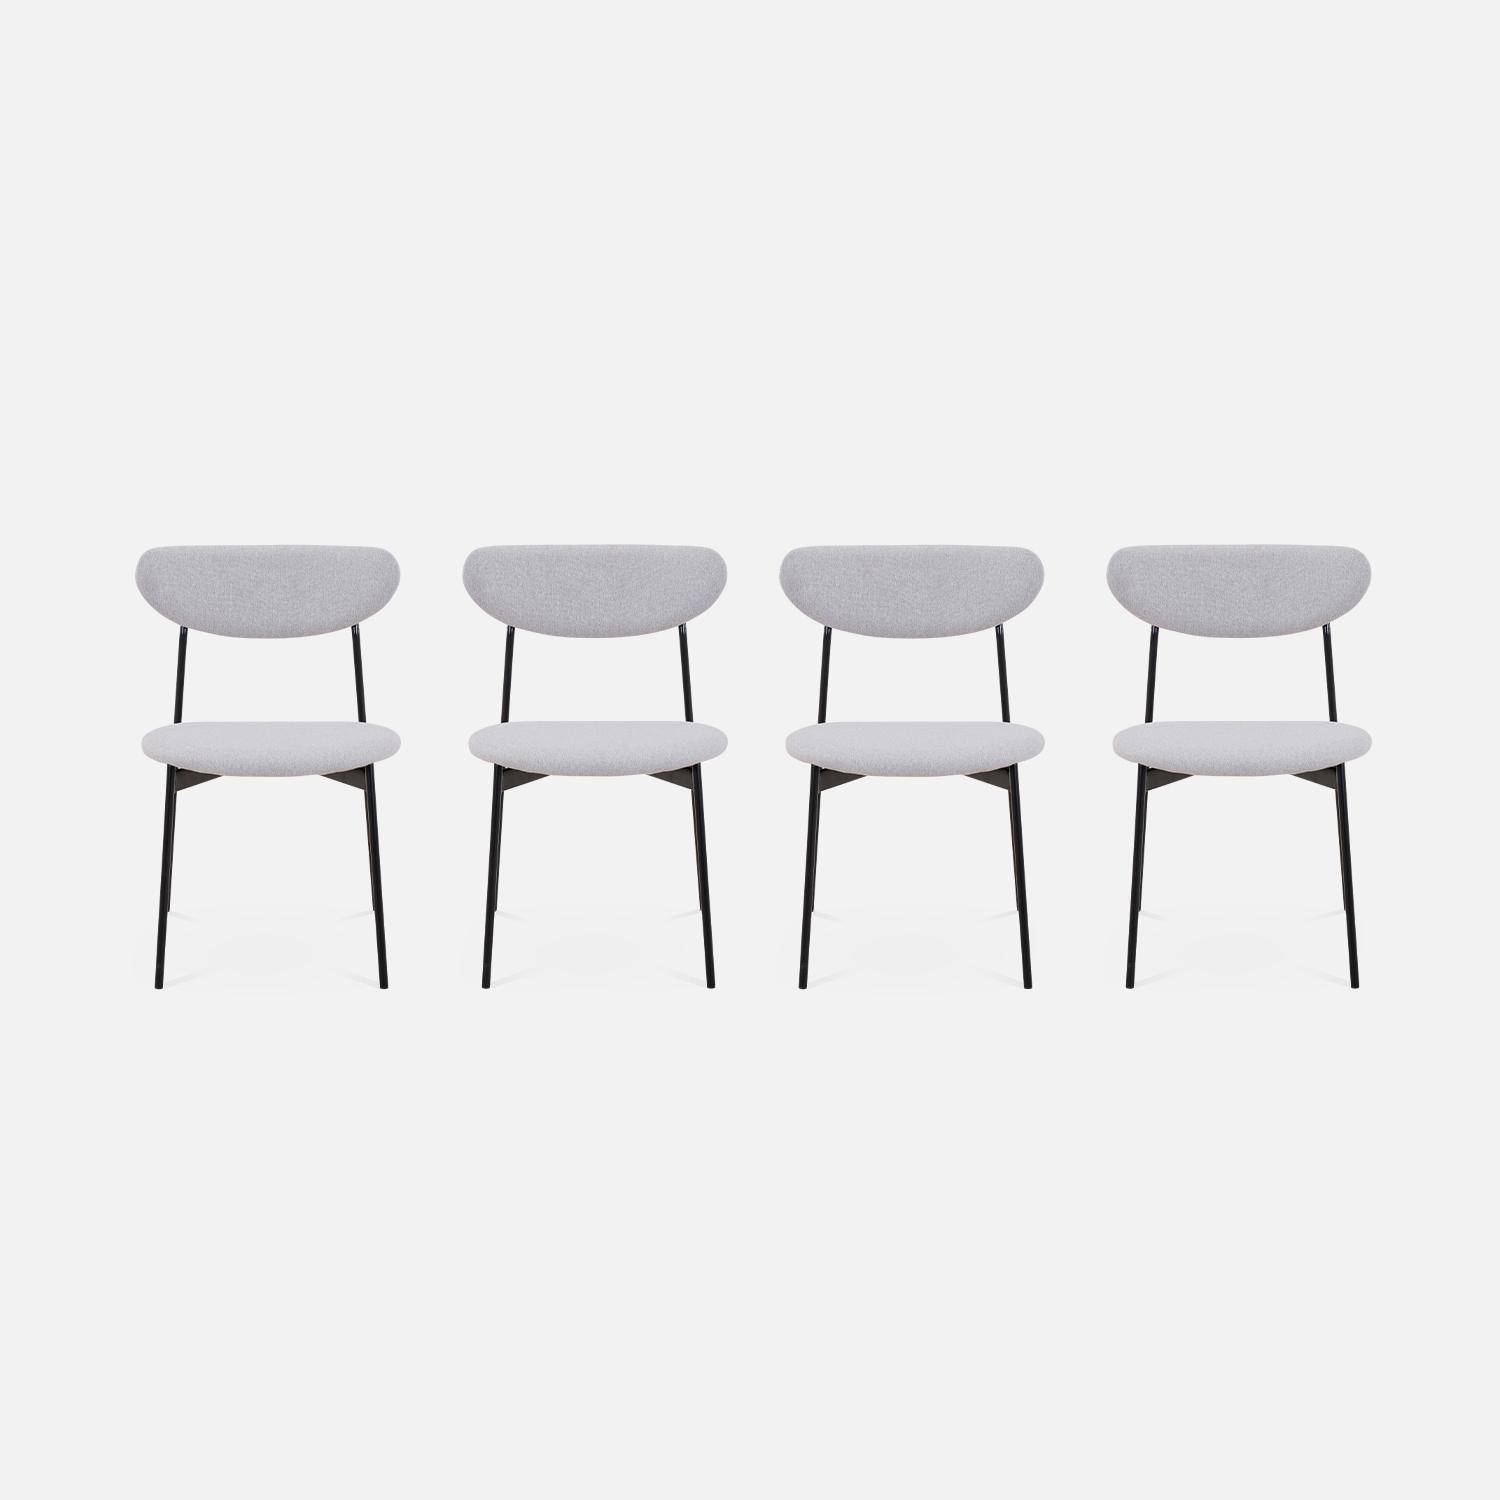 Set of 4 retro style dining chairs with steel legs - Arty - Light Grey,sweeek,Photo4